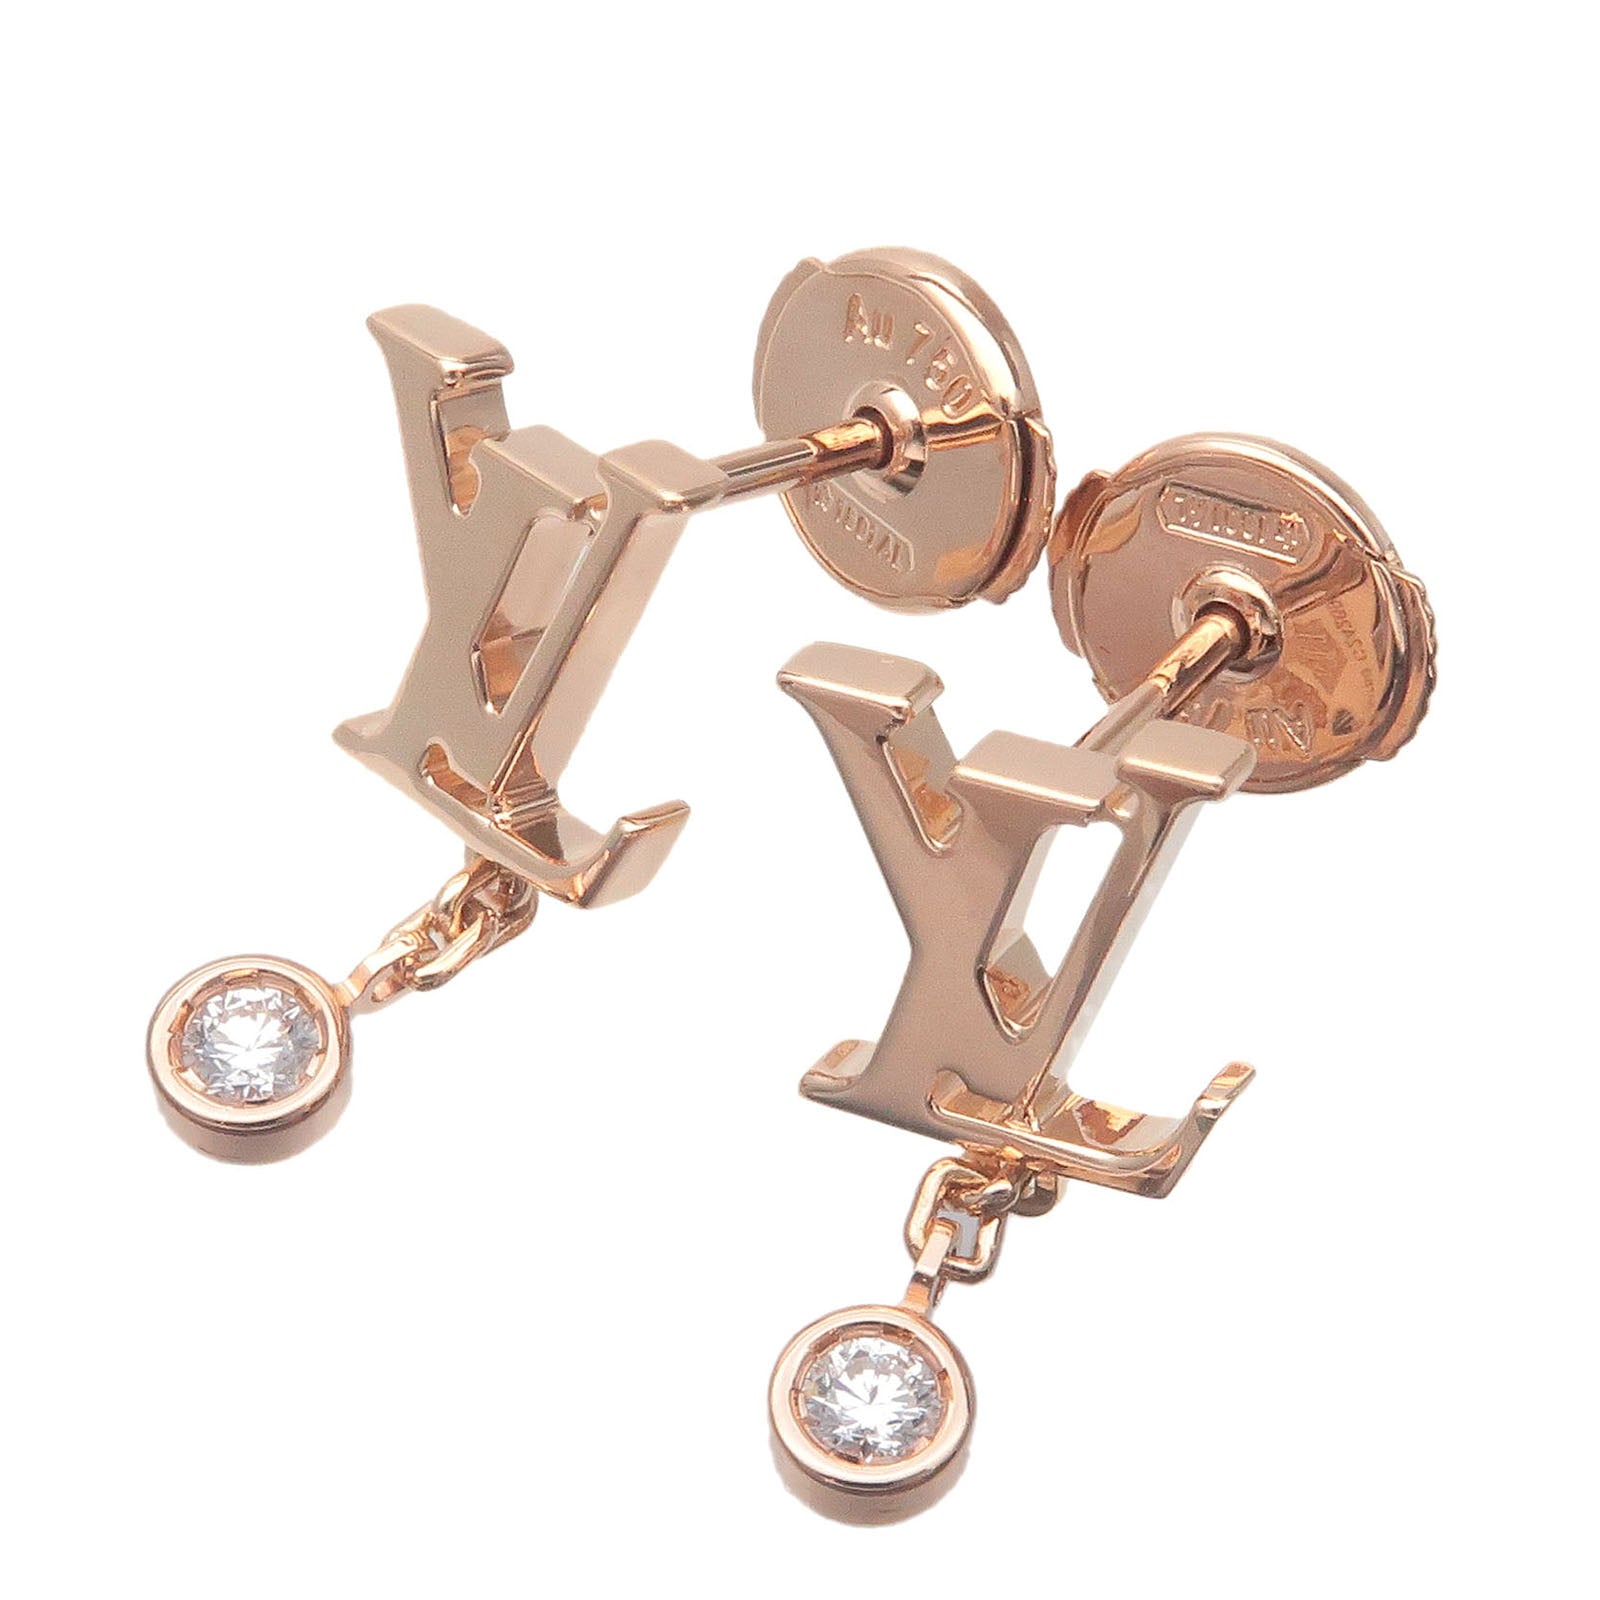 Louis-Vuitton-Puce-Idylle-Blossom-Earrings-Rose-Gold-Q96549